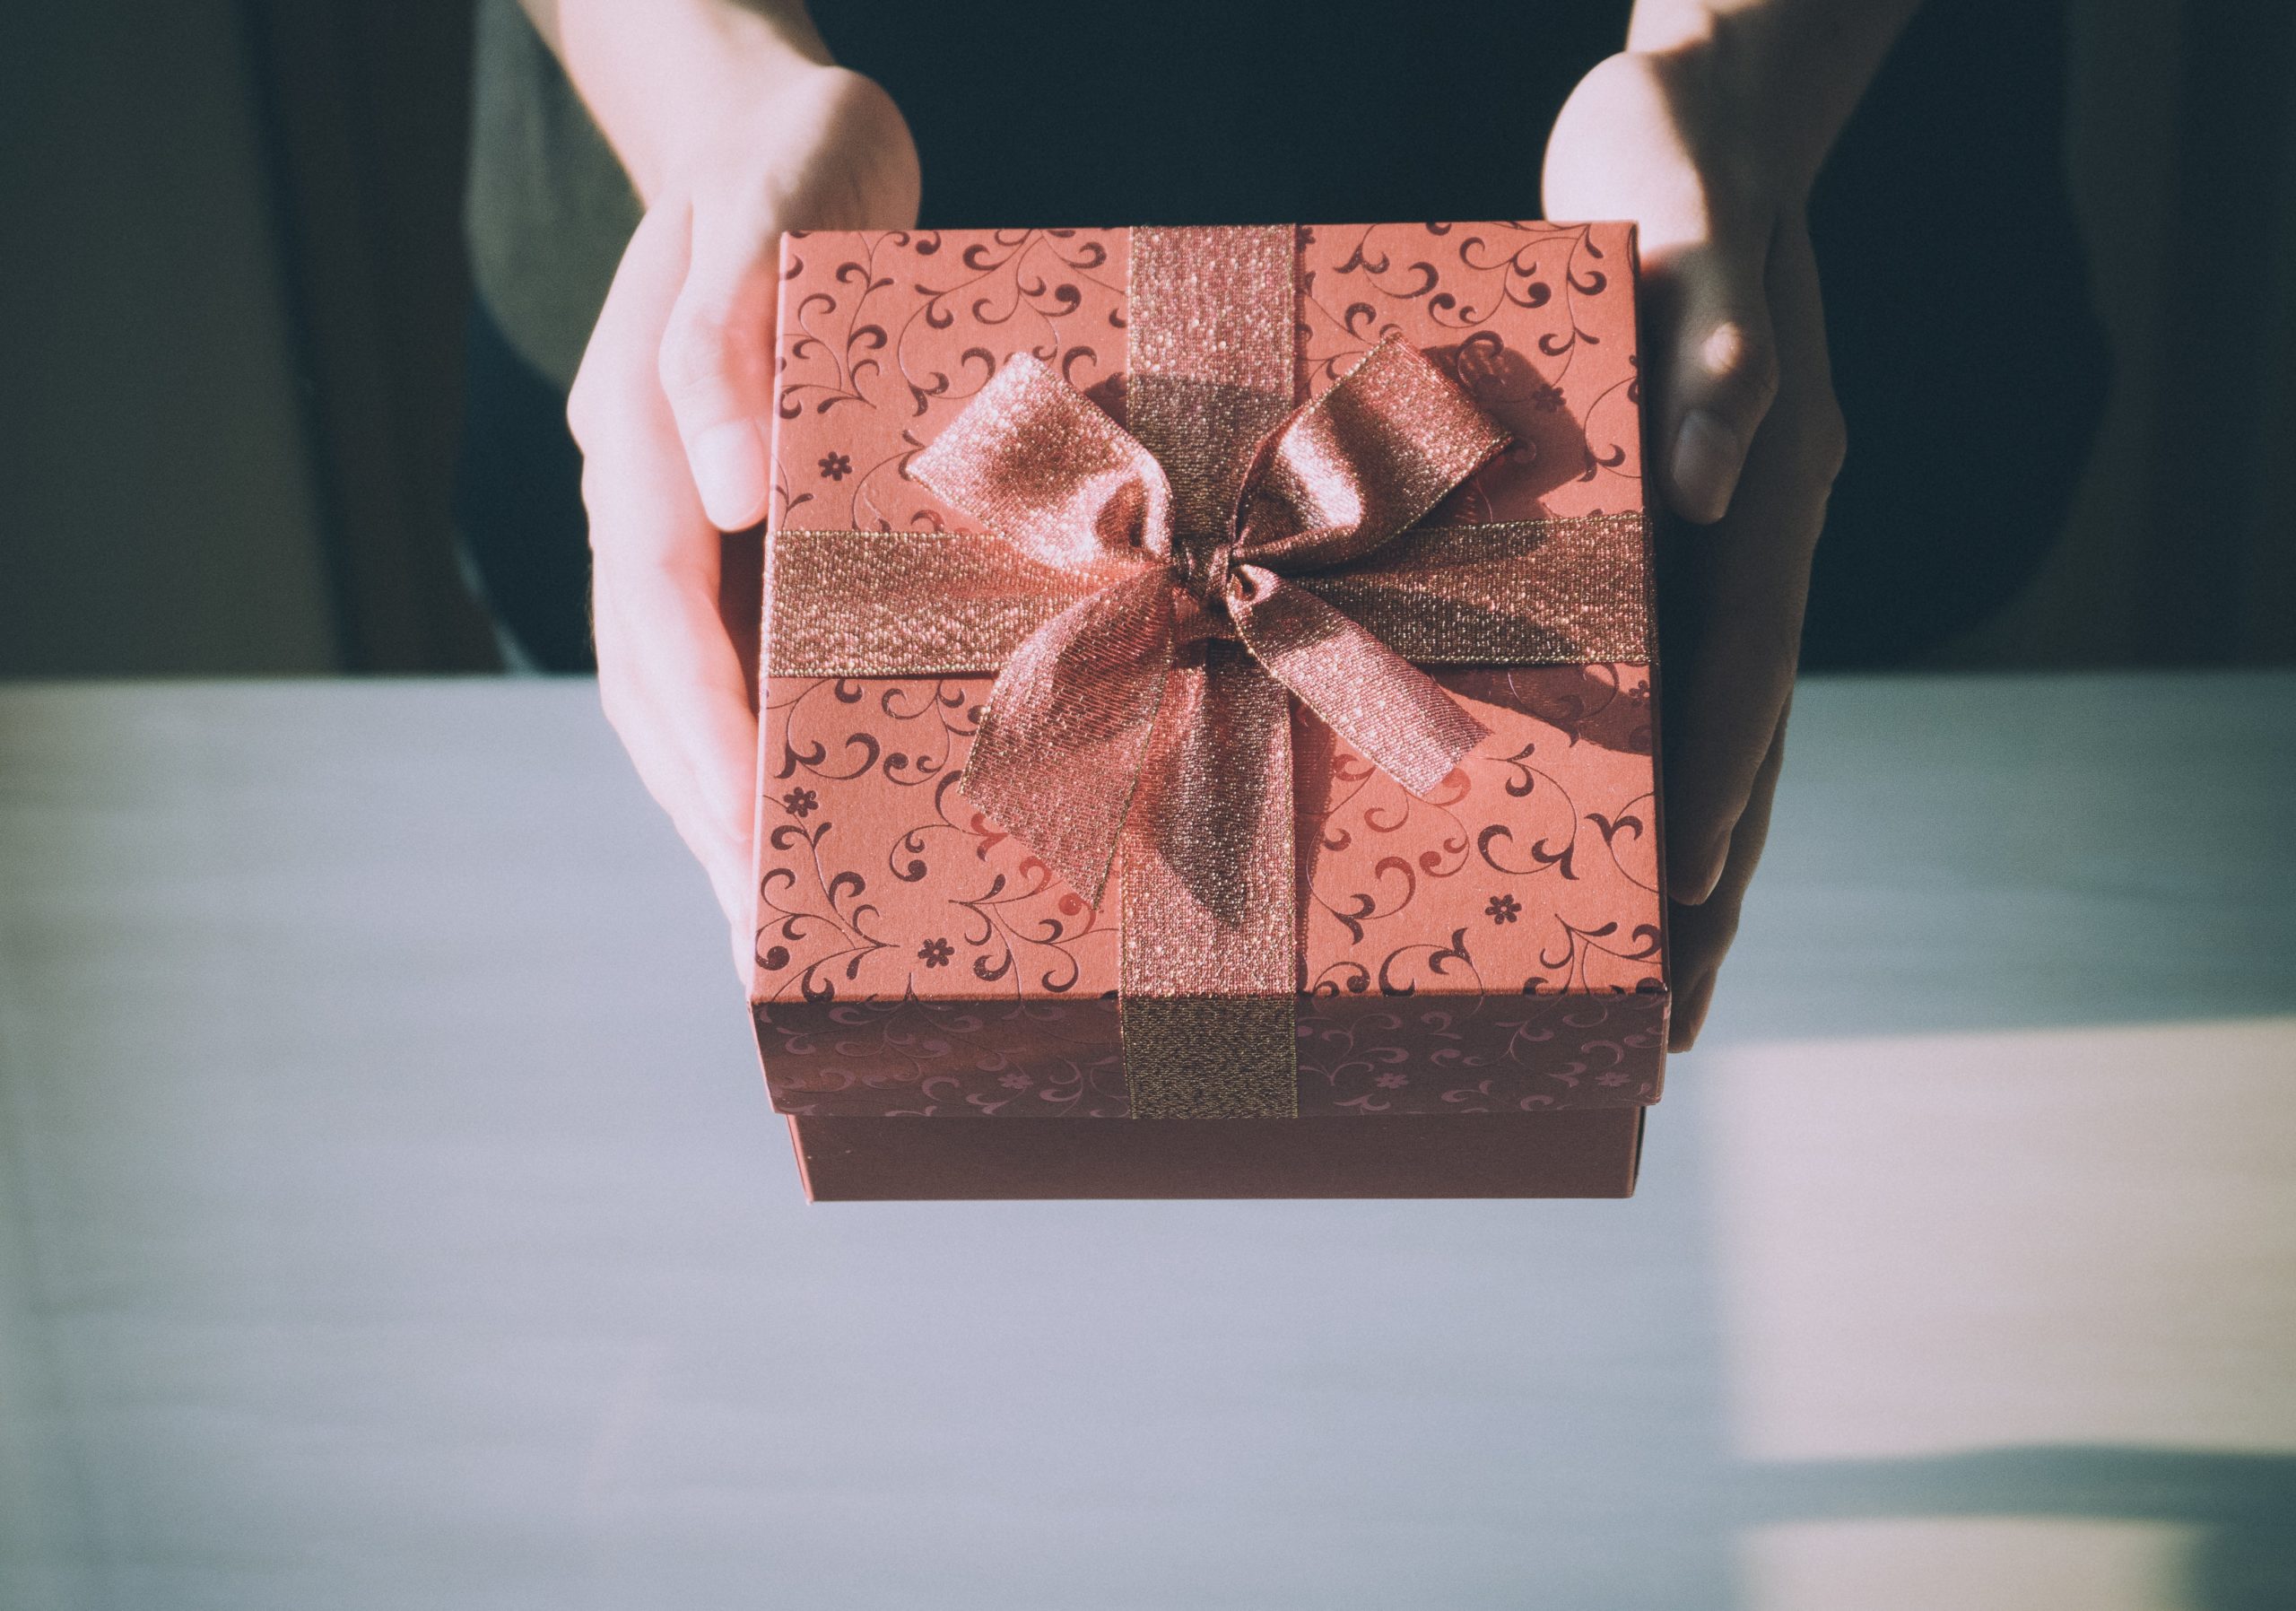 a person’s hands holding a gift